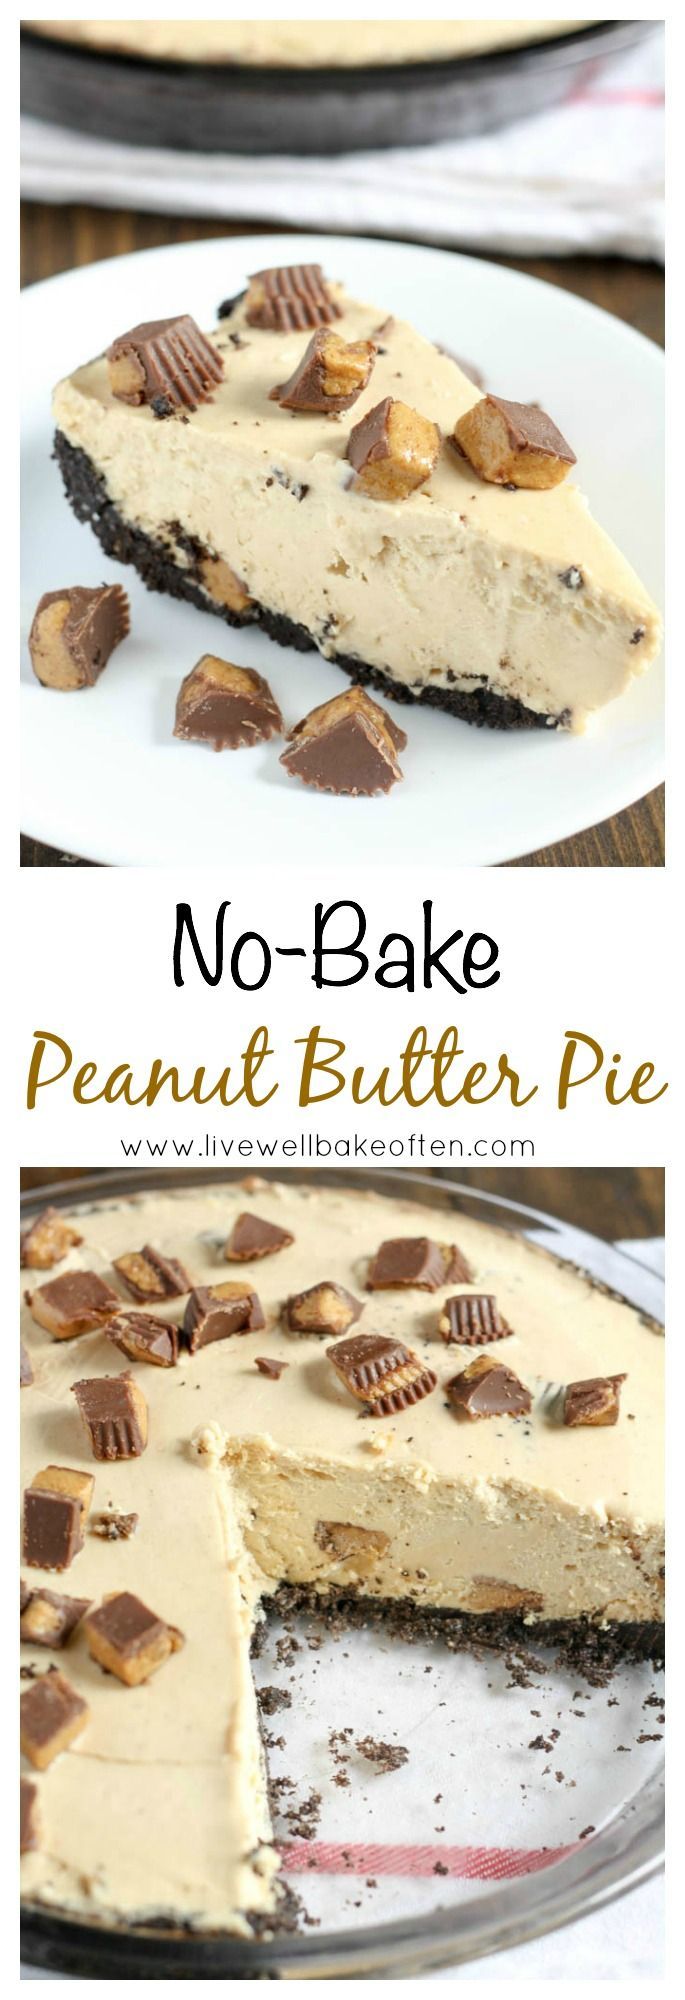 An easy no-bake peanut butter pie with a homemade Oreo crust!